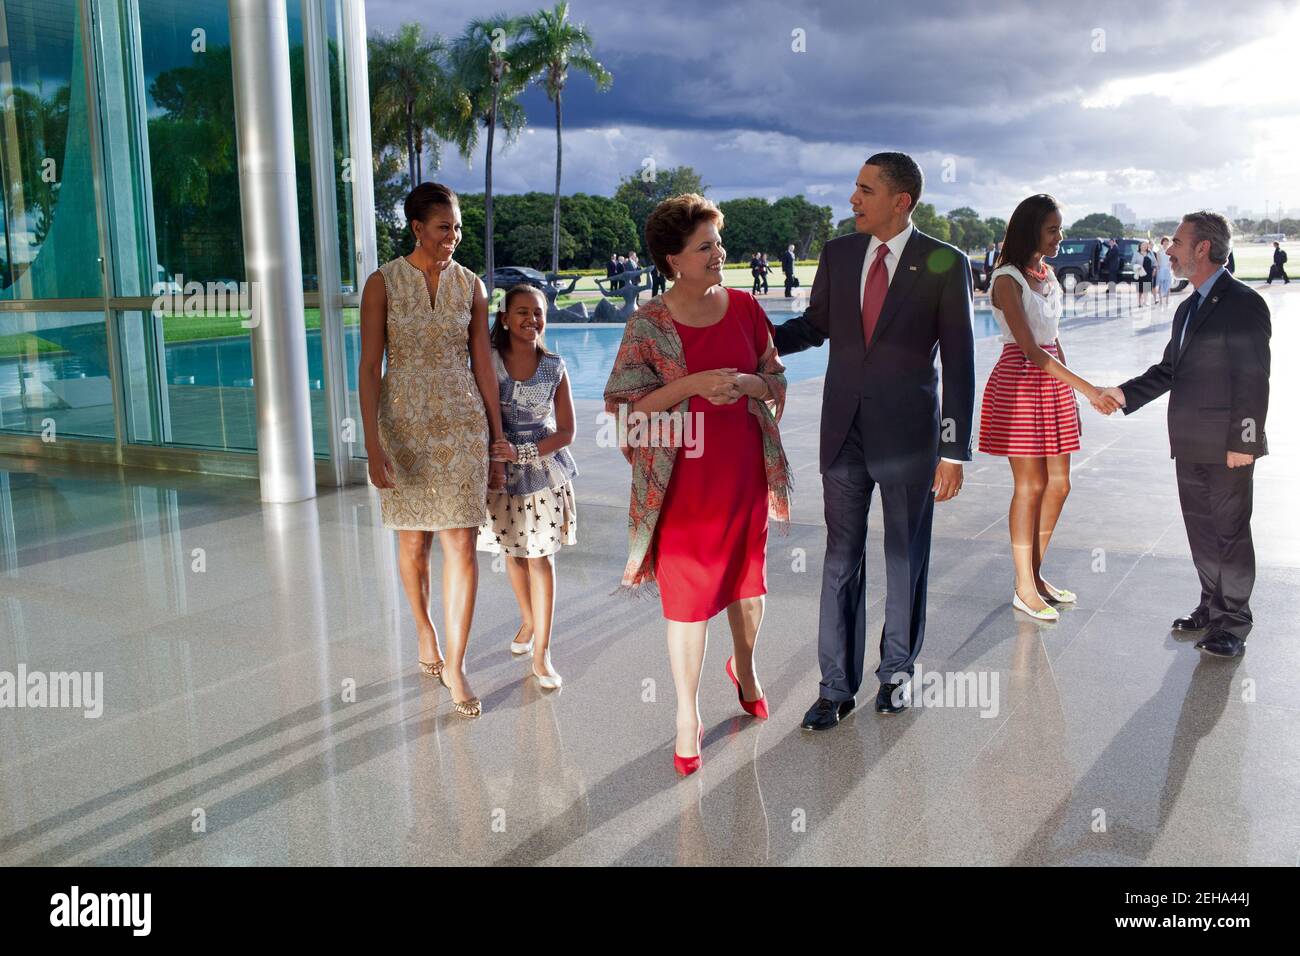 March 19, 2011 'The late afternoon light was bouncing off the glass and steel at the Palacio do Alvorada in Brasilia, Brazil, as the President and his family arrived to greet Brazilian President Dilma Rousseff and foreign Minister Antonio Patriota. I was backpedaling as I made this picture and in retrospect wish that I had taken this at a lower angle.' Stock Photo